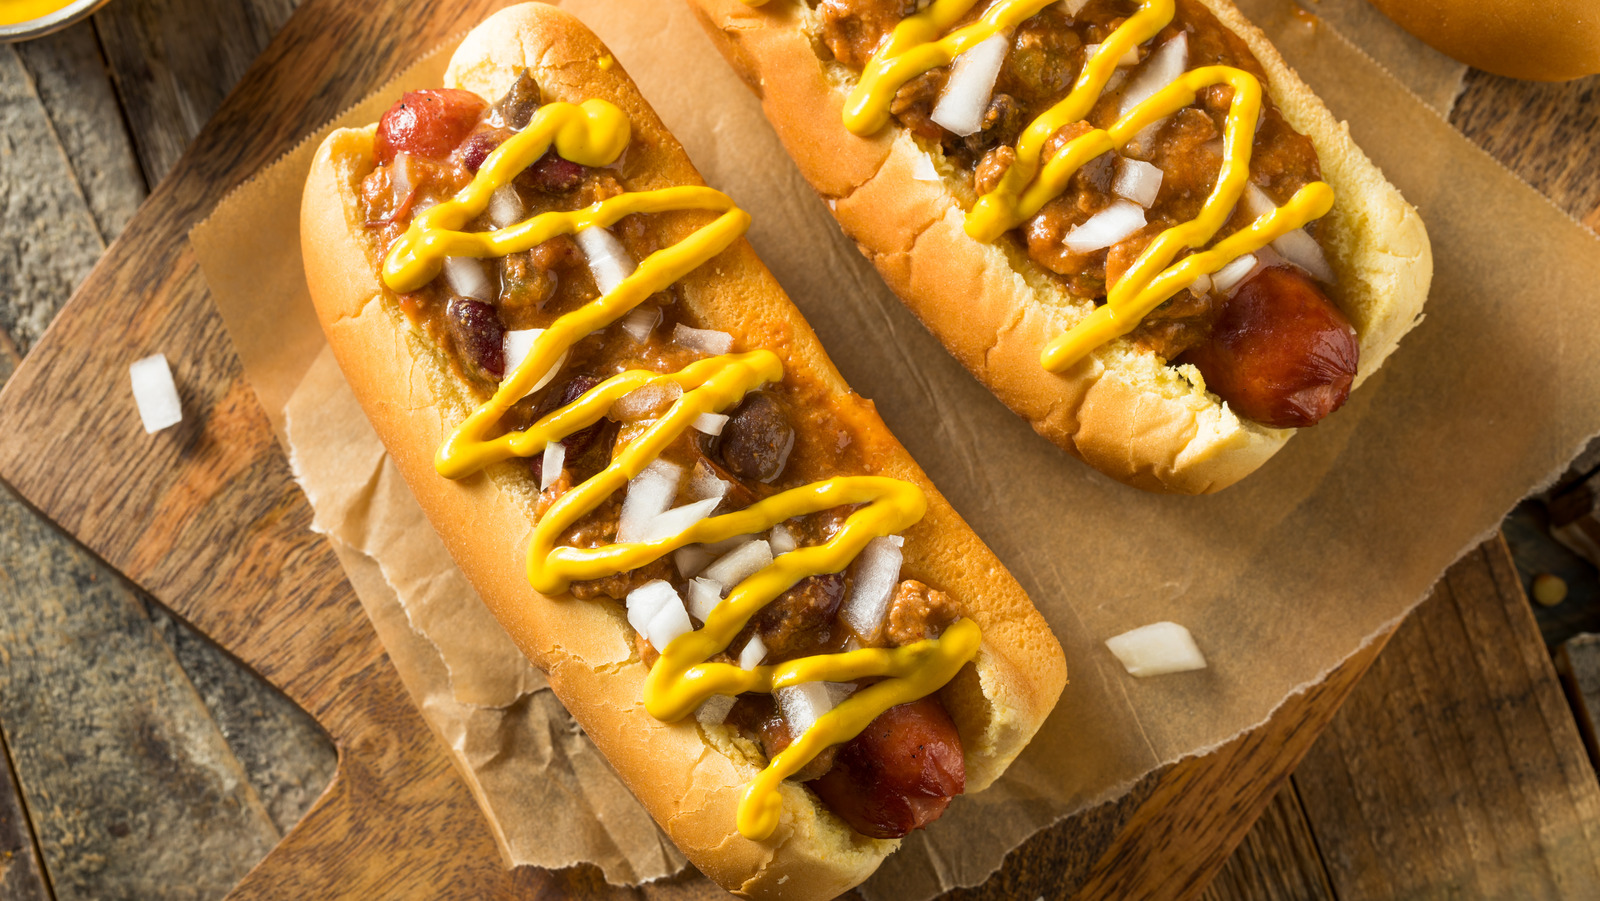 who invented chili dogs